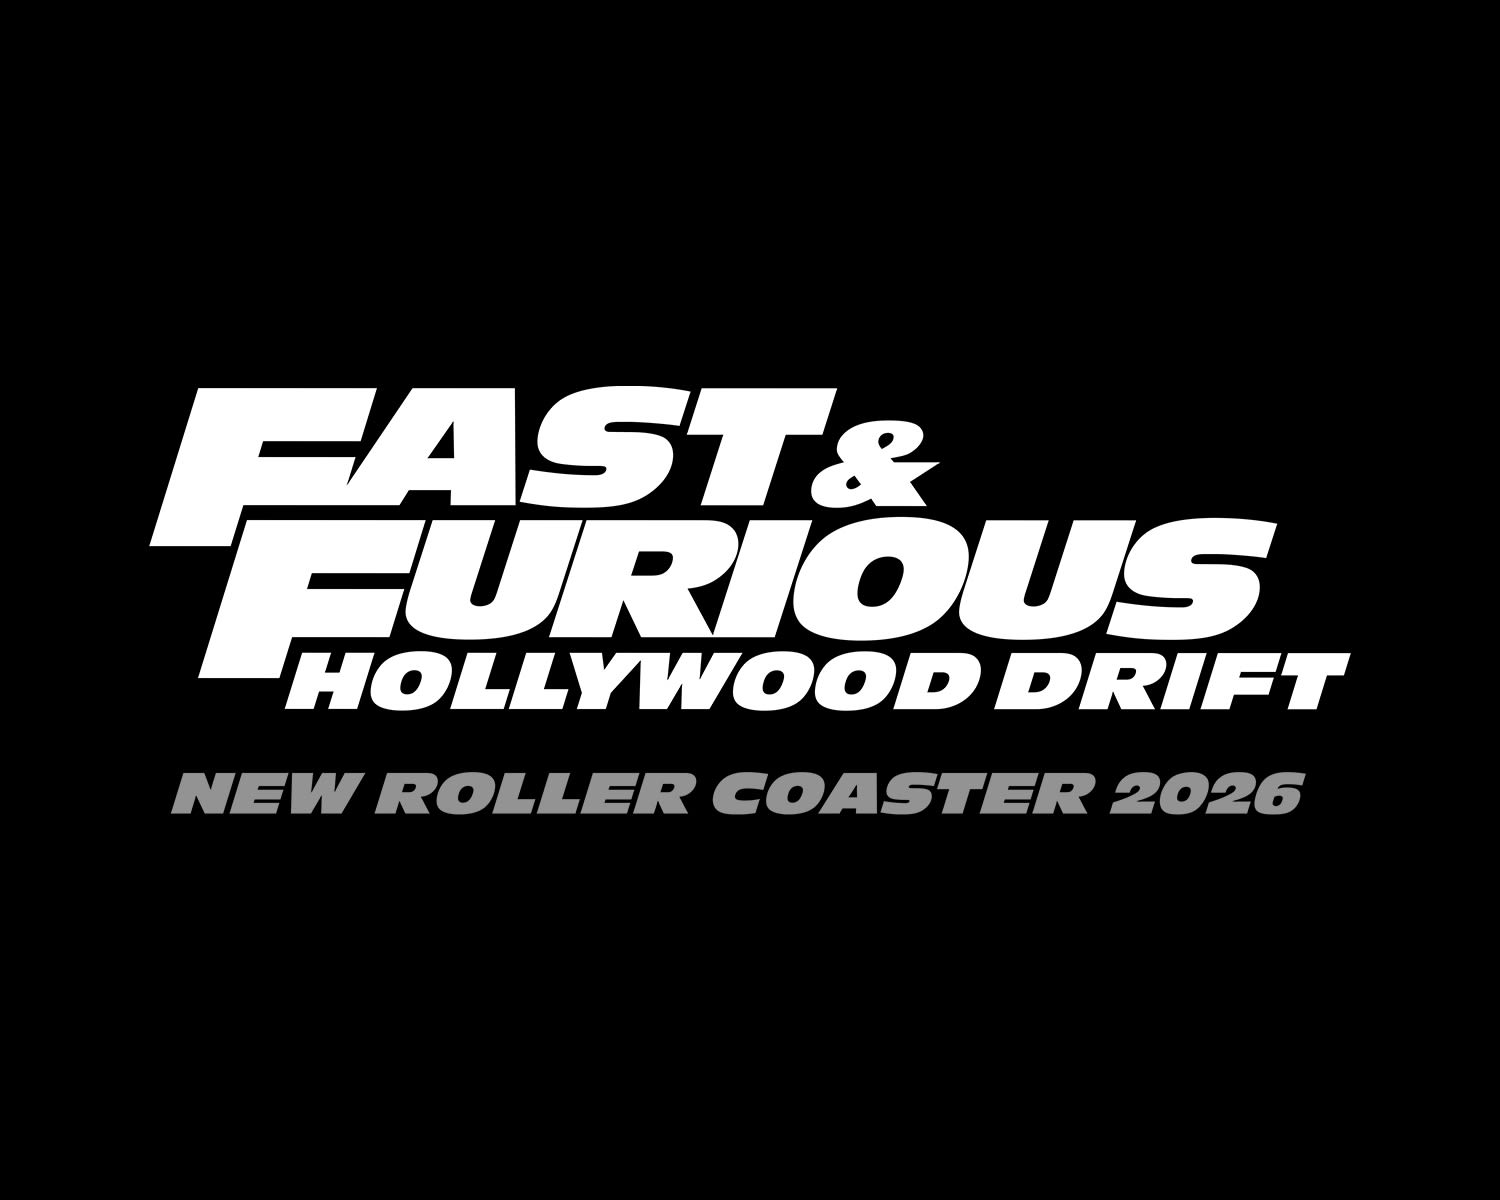 360-Degree Spinning “Fast & Furious: Hollywood Drift” Roller Coaster Set For Universal Studios Hollywood